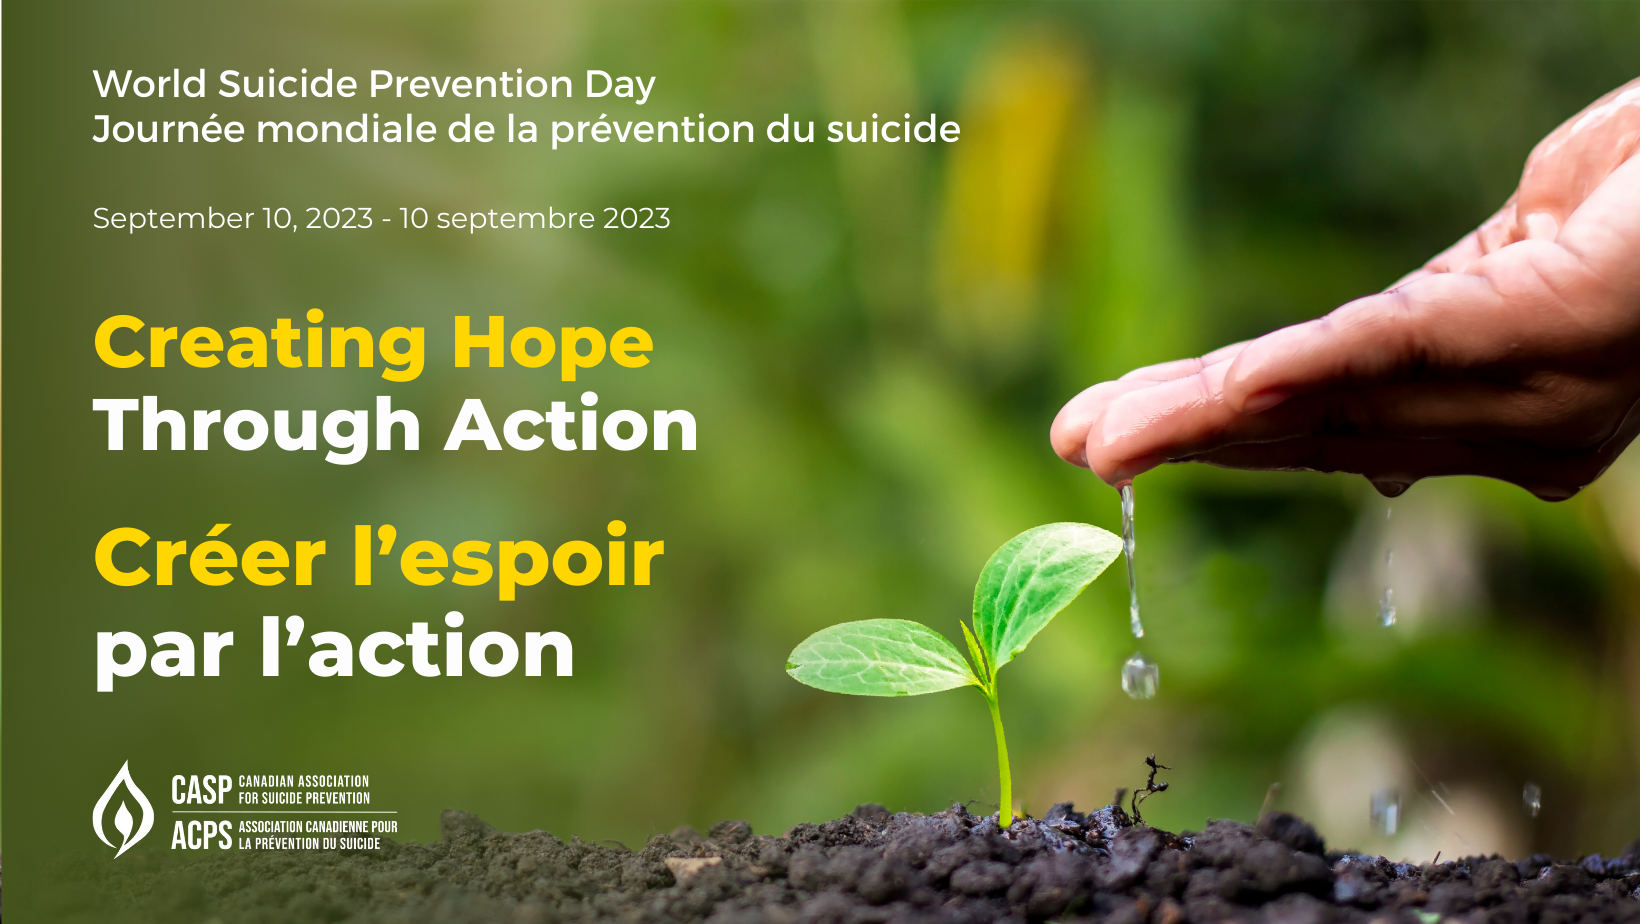 The campaign image from the Canadian Association for suicide prevention for the 2023 World Suicide Prevention Day